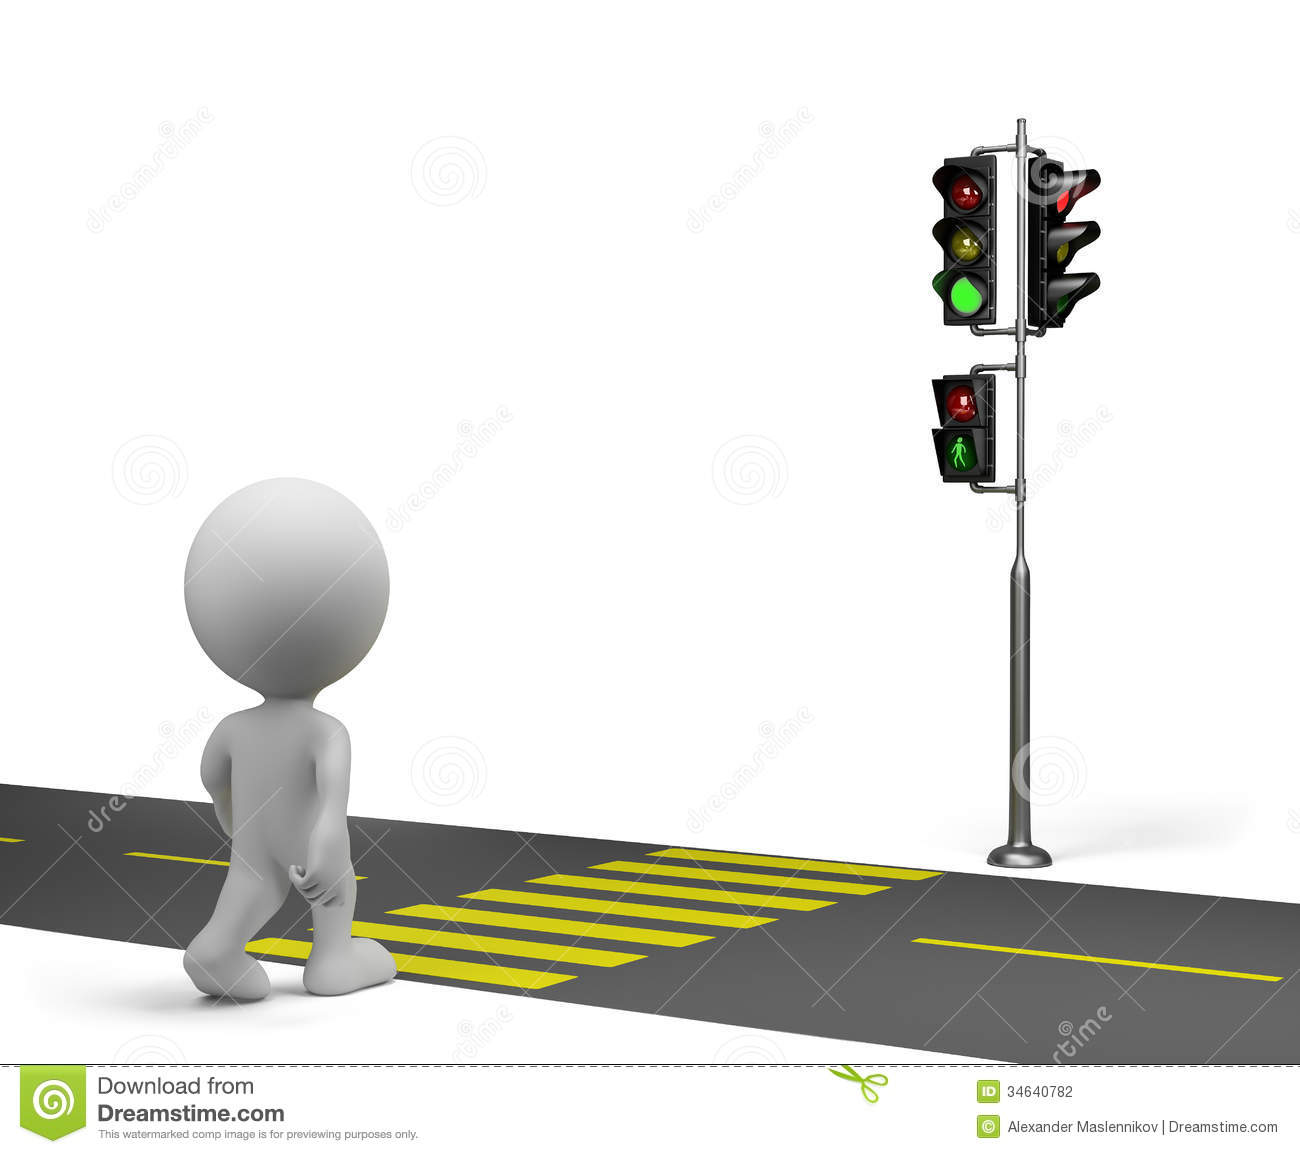 The Road On The Green Traffic Light  3d Image  White Background